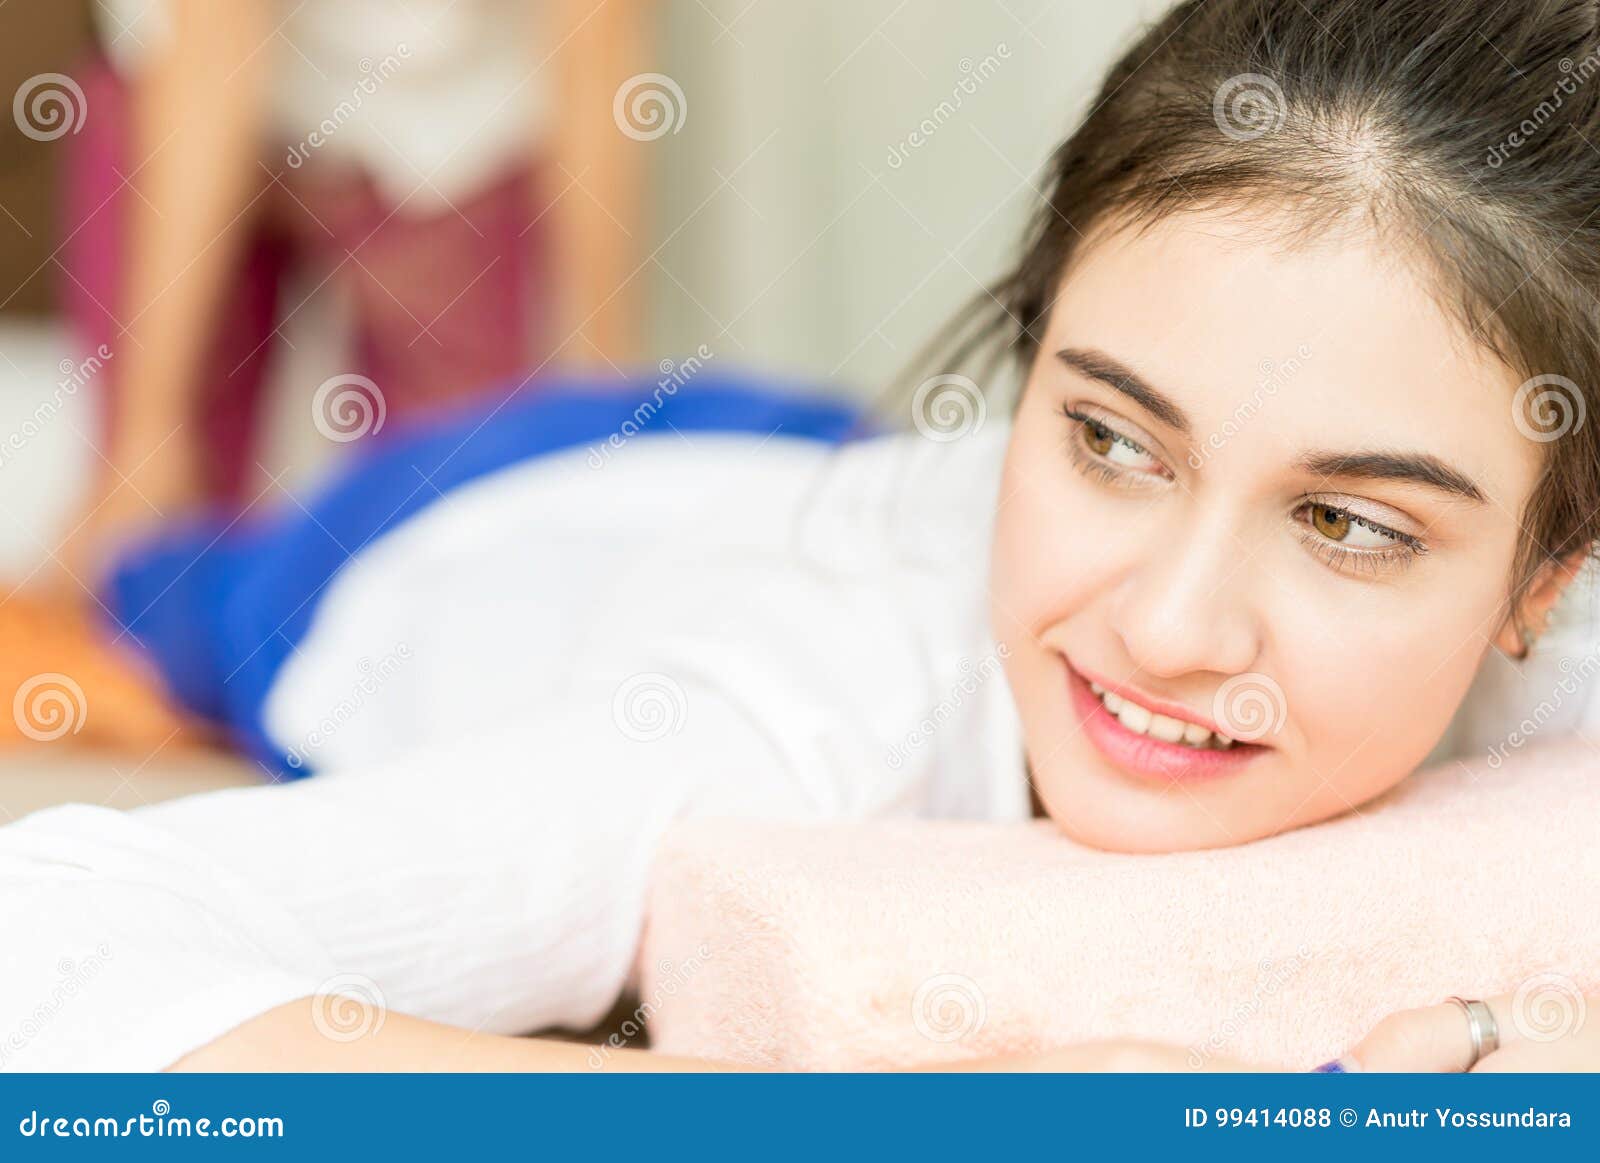 Portrait Of A Women Getting Thai Massage Stock Photo Image Of